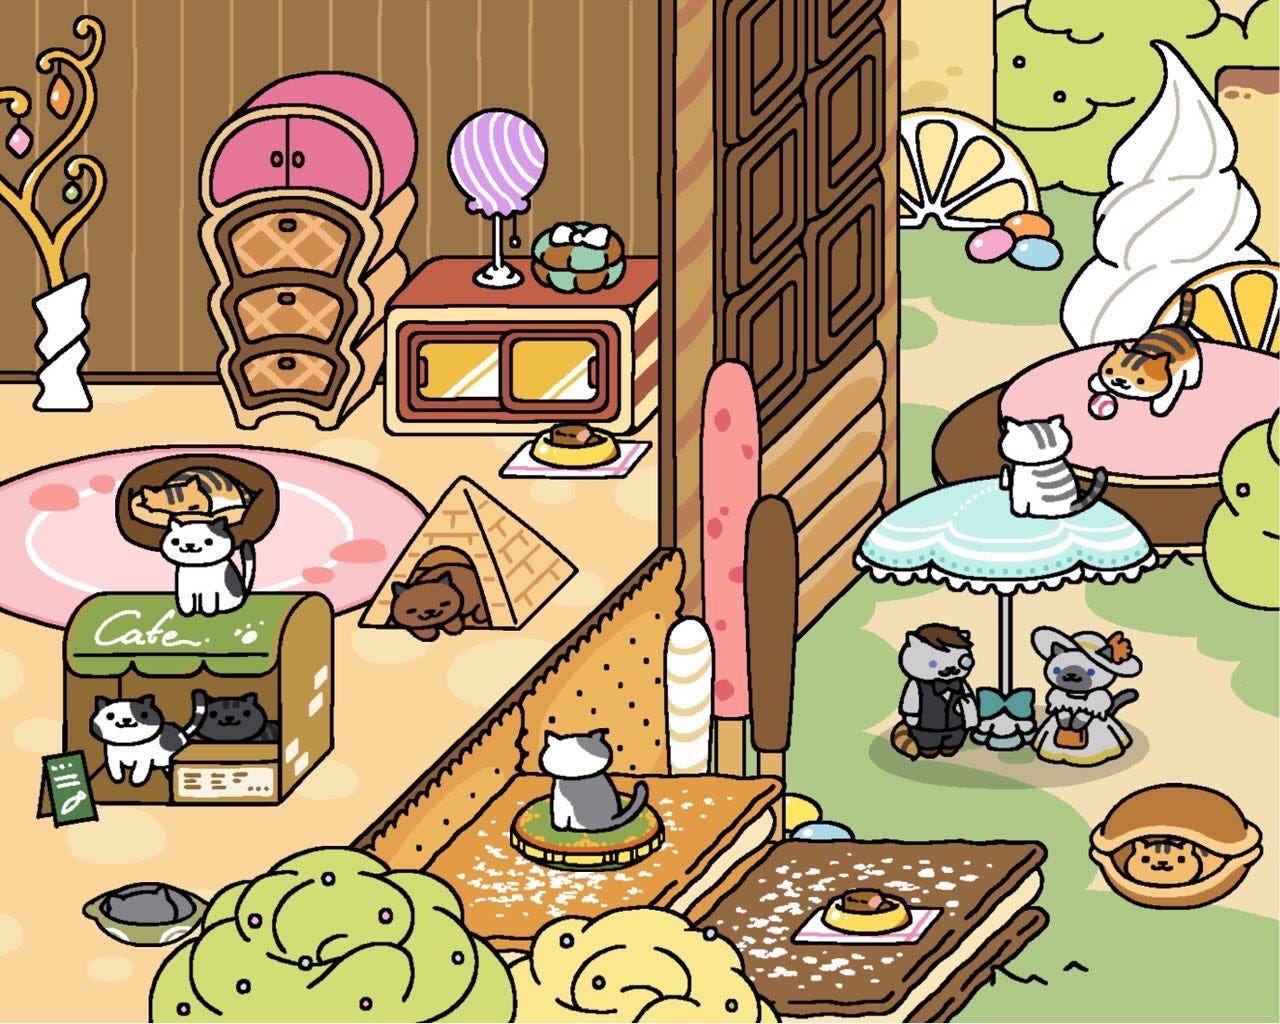 5 Cute, Chill & Passive Mobile Games to Help You Relax, by Valerie Lim, Counter Arts